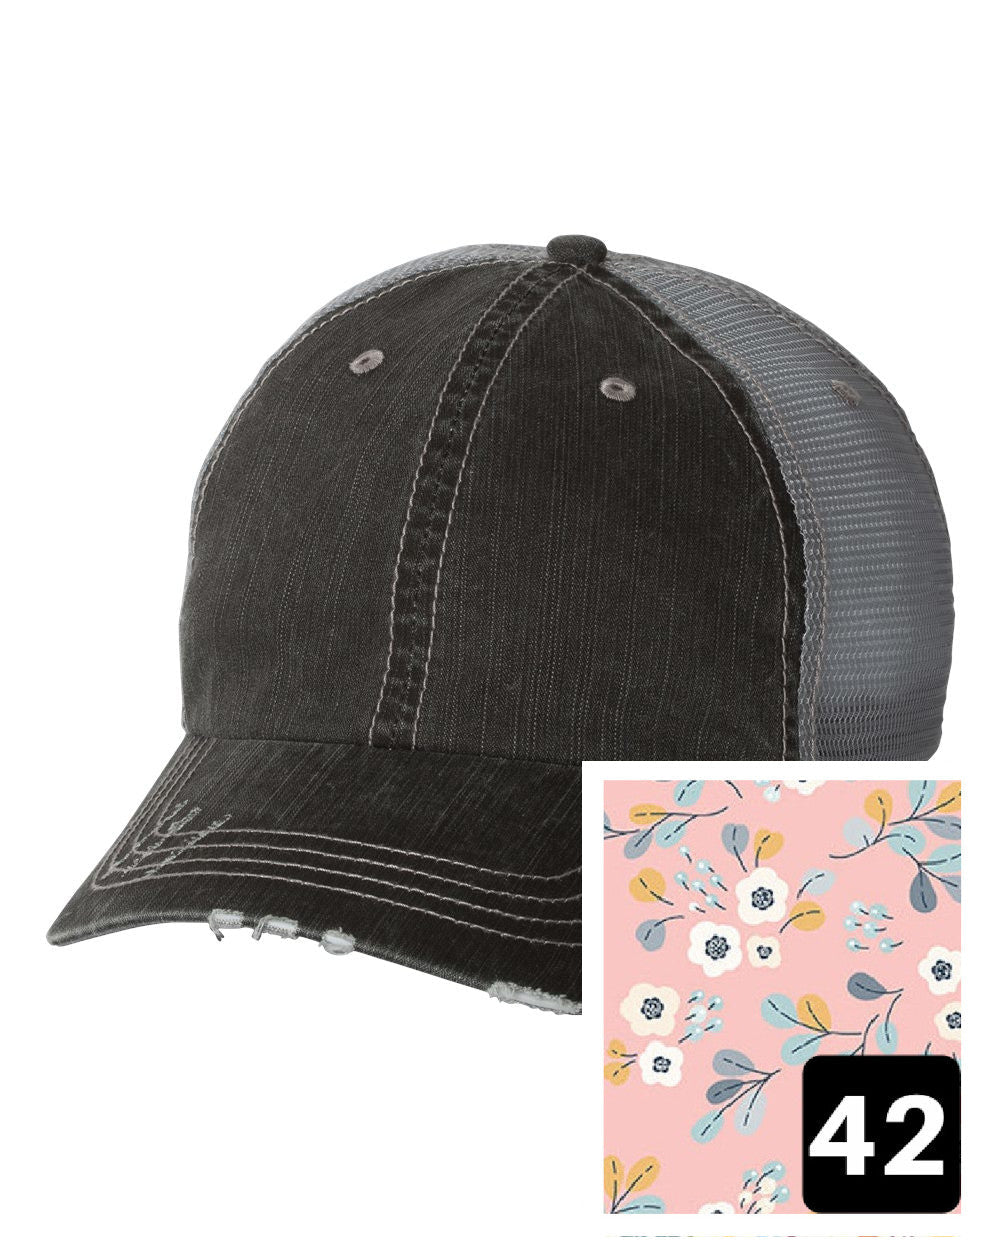 gray distressed trucker hat with light blue and pink mosaic fabric state of Oklahoma